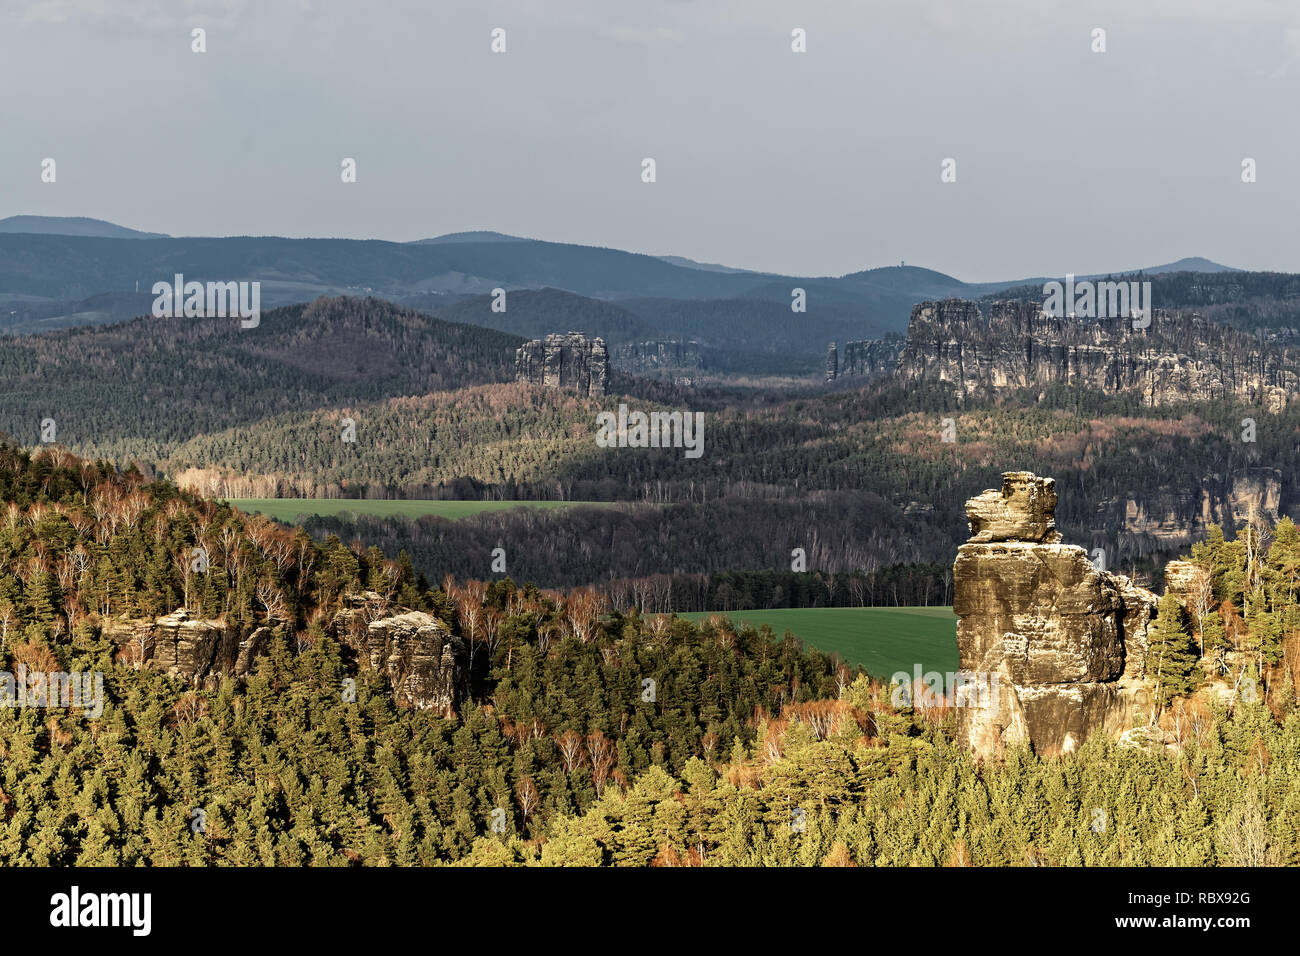 Elbe Sandstone Mountains - View from the mountain 'Gohrisch' to the mountains 'Schrammsteine' in evening light, in the foreground a rock formation wit Stock Photo